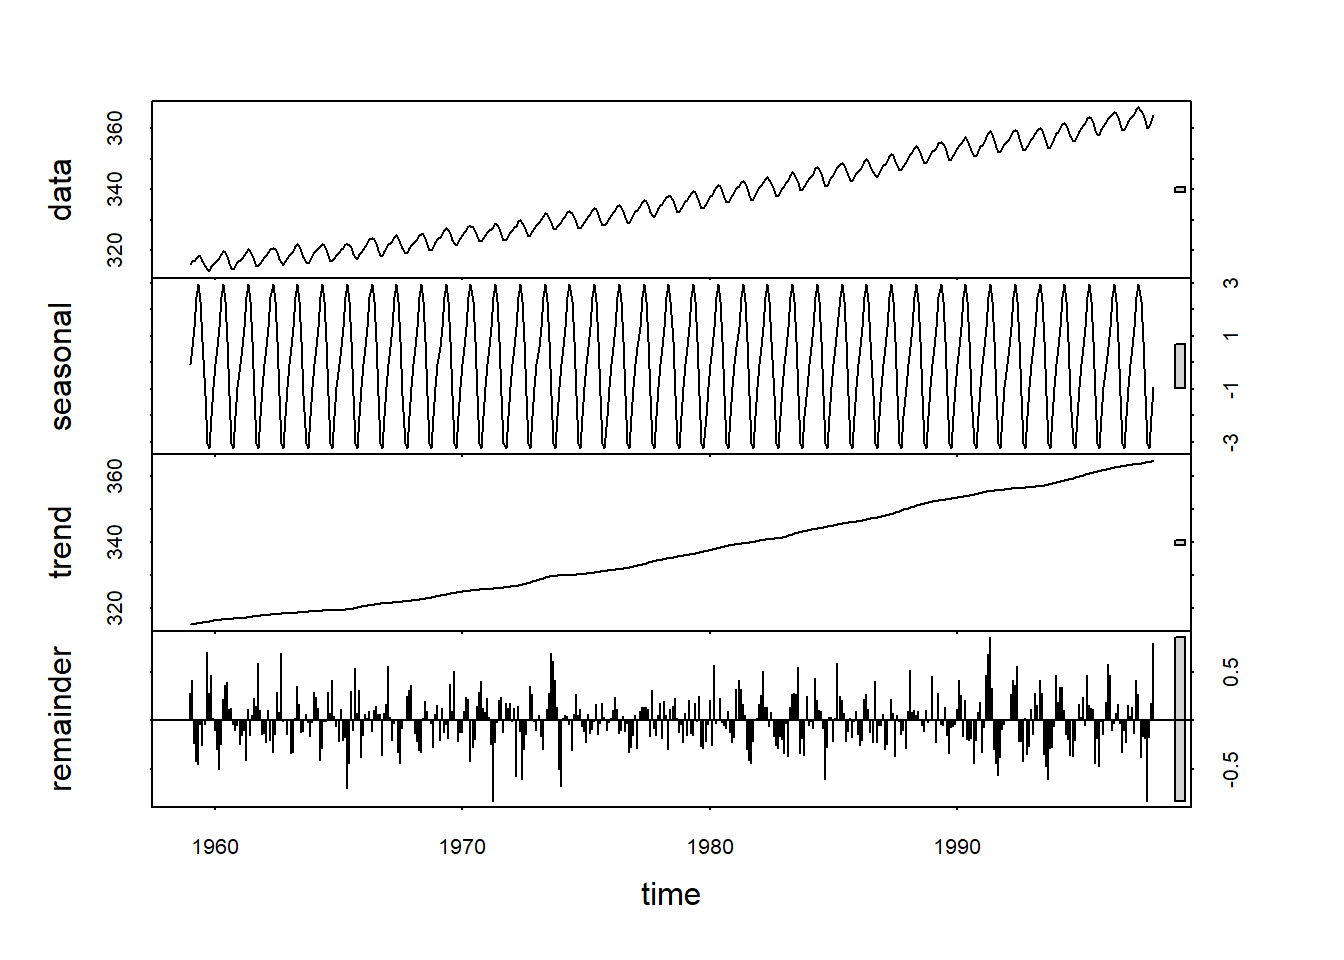 Seasonal deomposition of time series using loess (stl) applied to co2